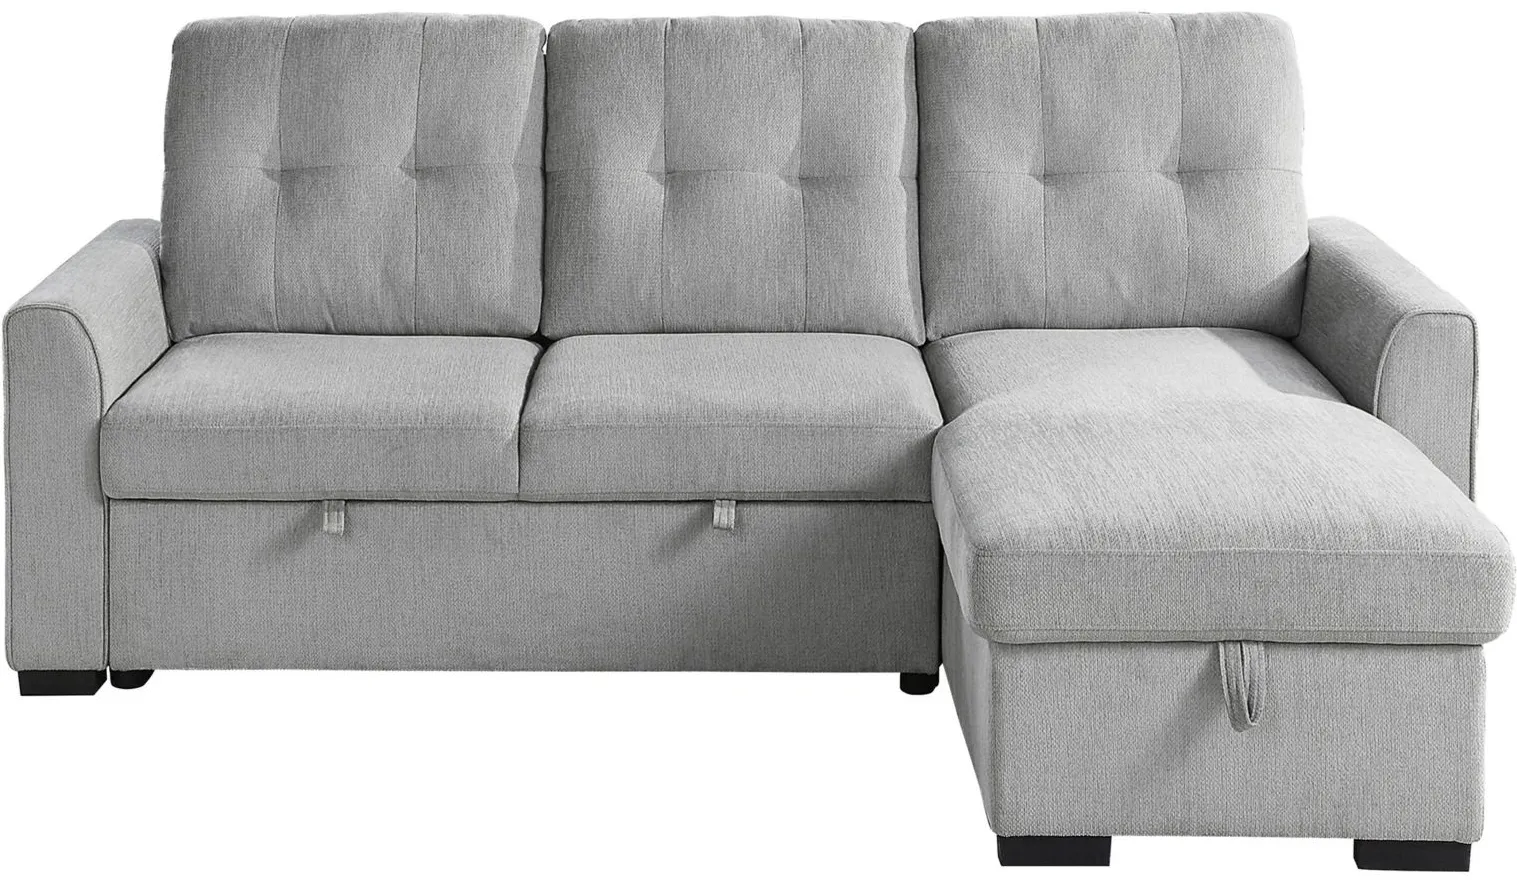 Ember 2-Piece Reversible Sectional with Storage in Light Gray by Homelegance